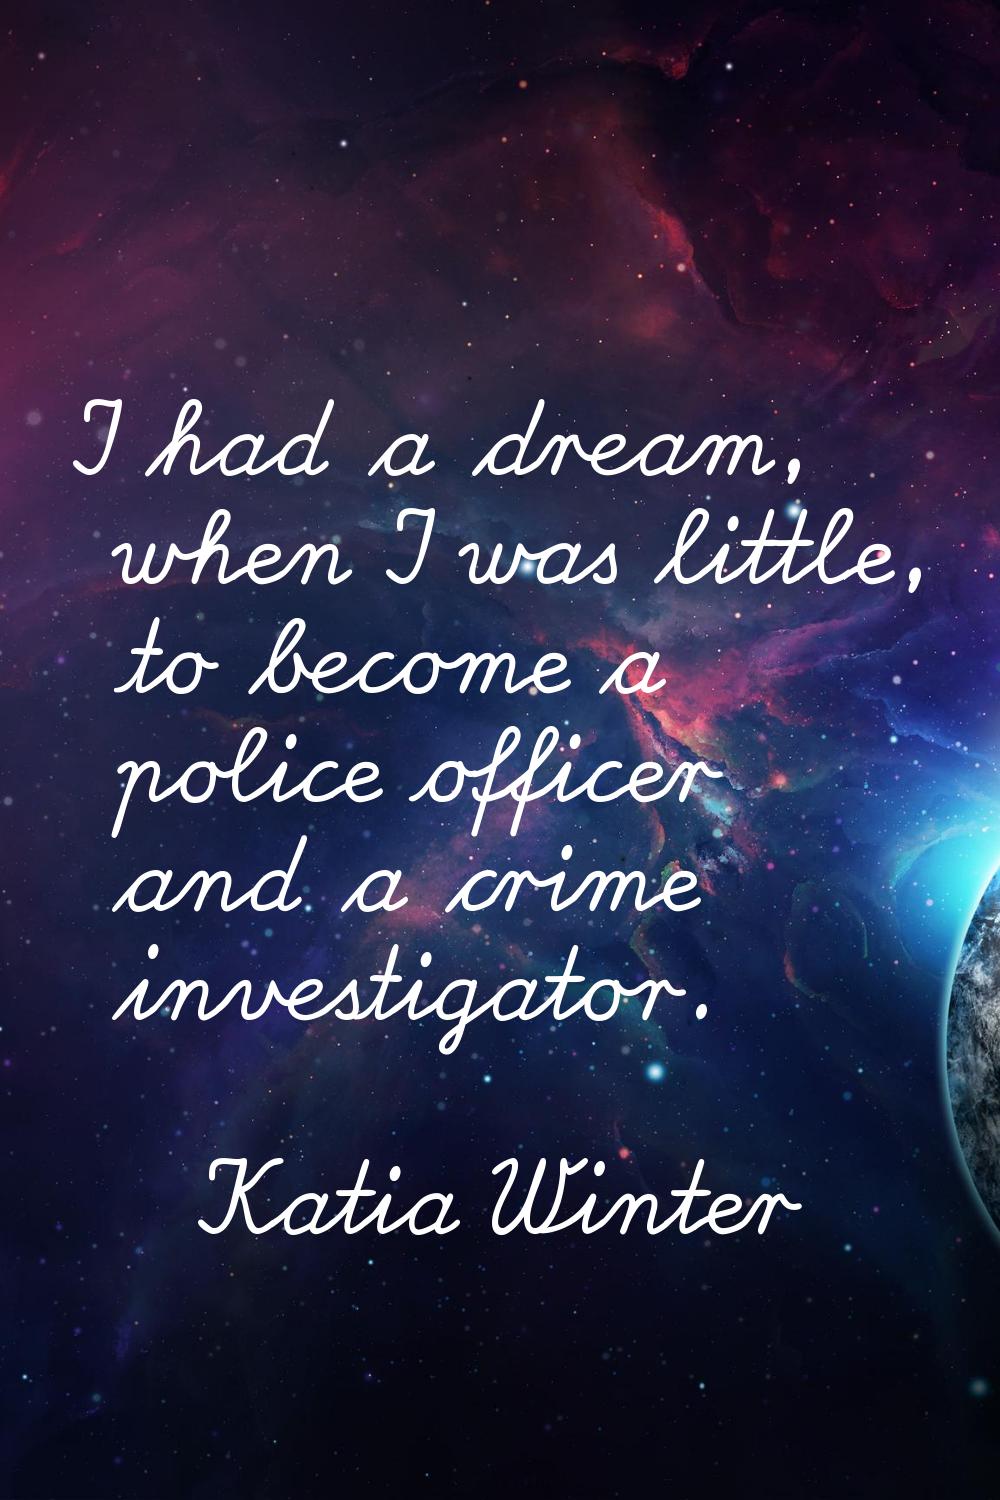 I had a dream, when I was little, to become a police officer and a crime investigator.